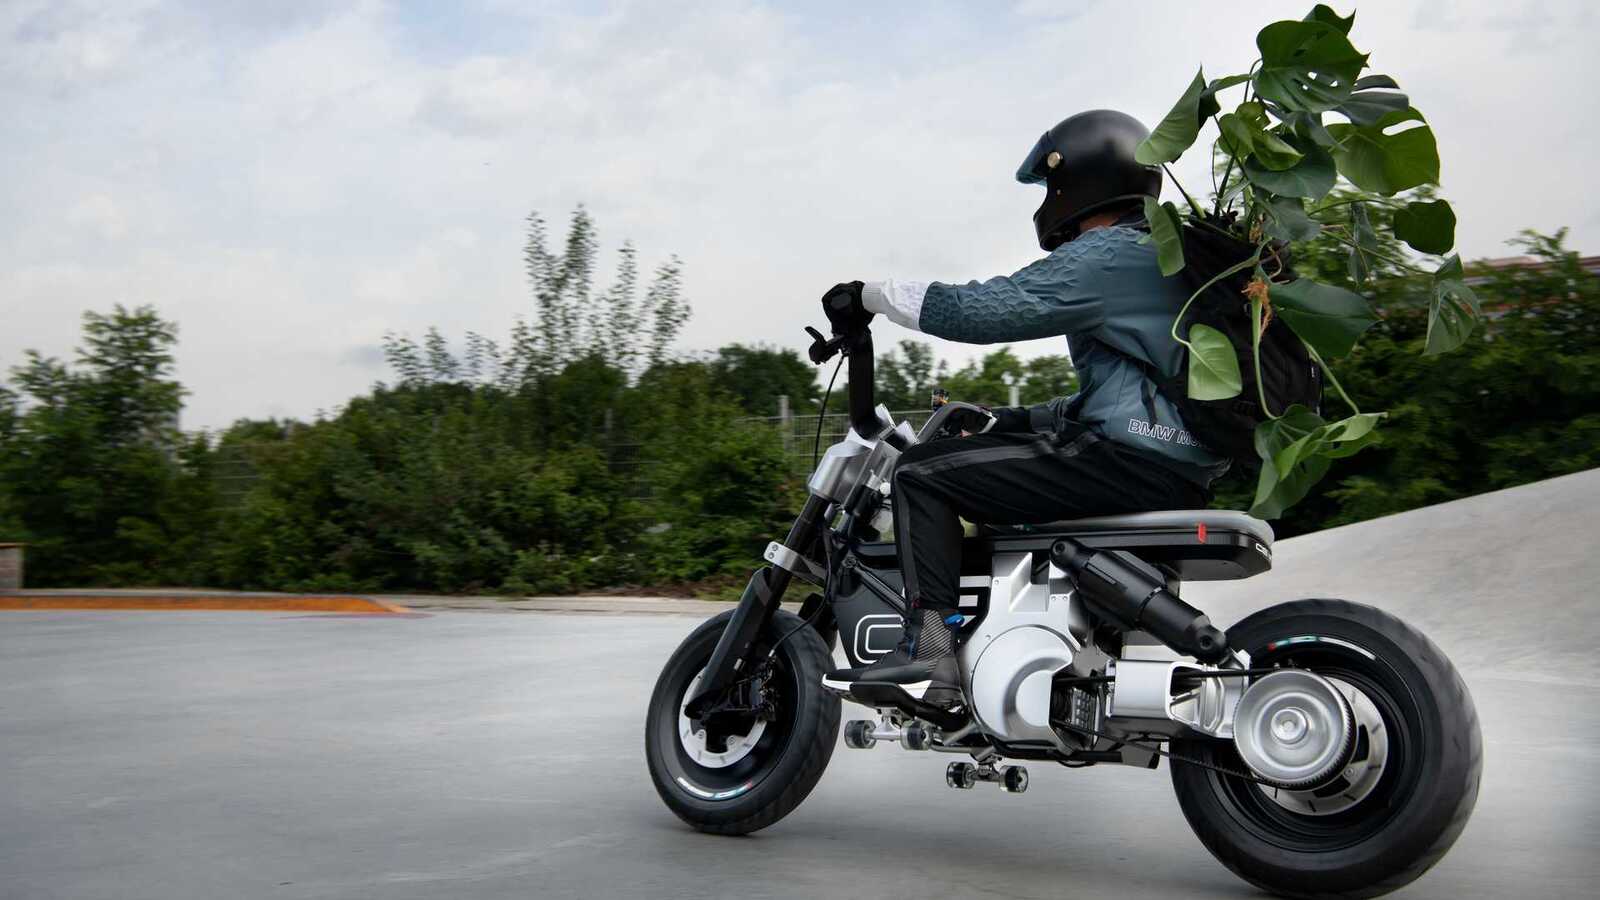 ce-02---left-side-riding-with-plant-and-skateboard.jpg